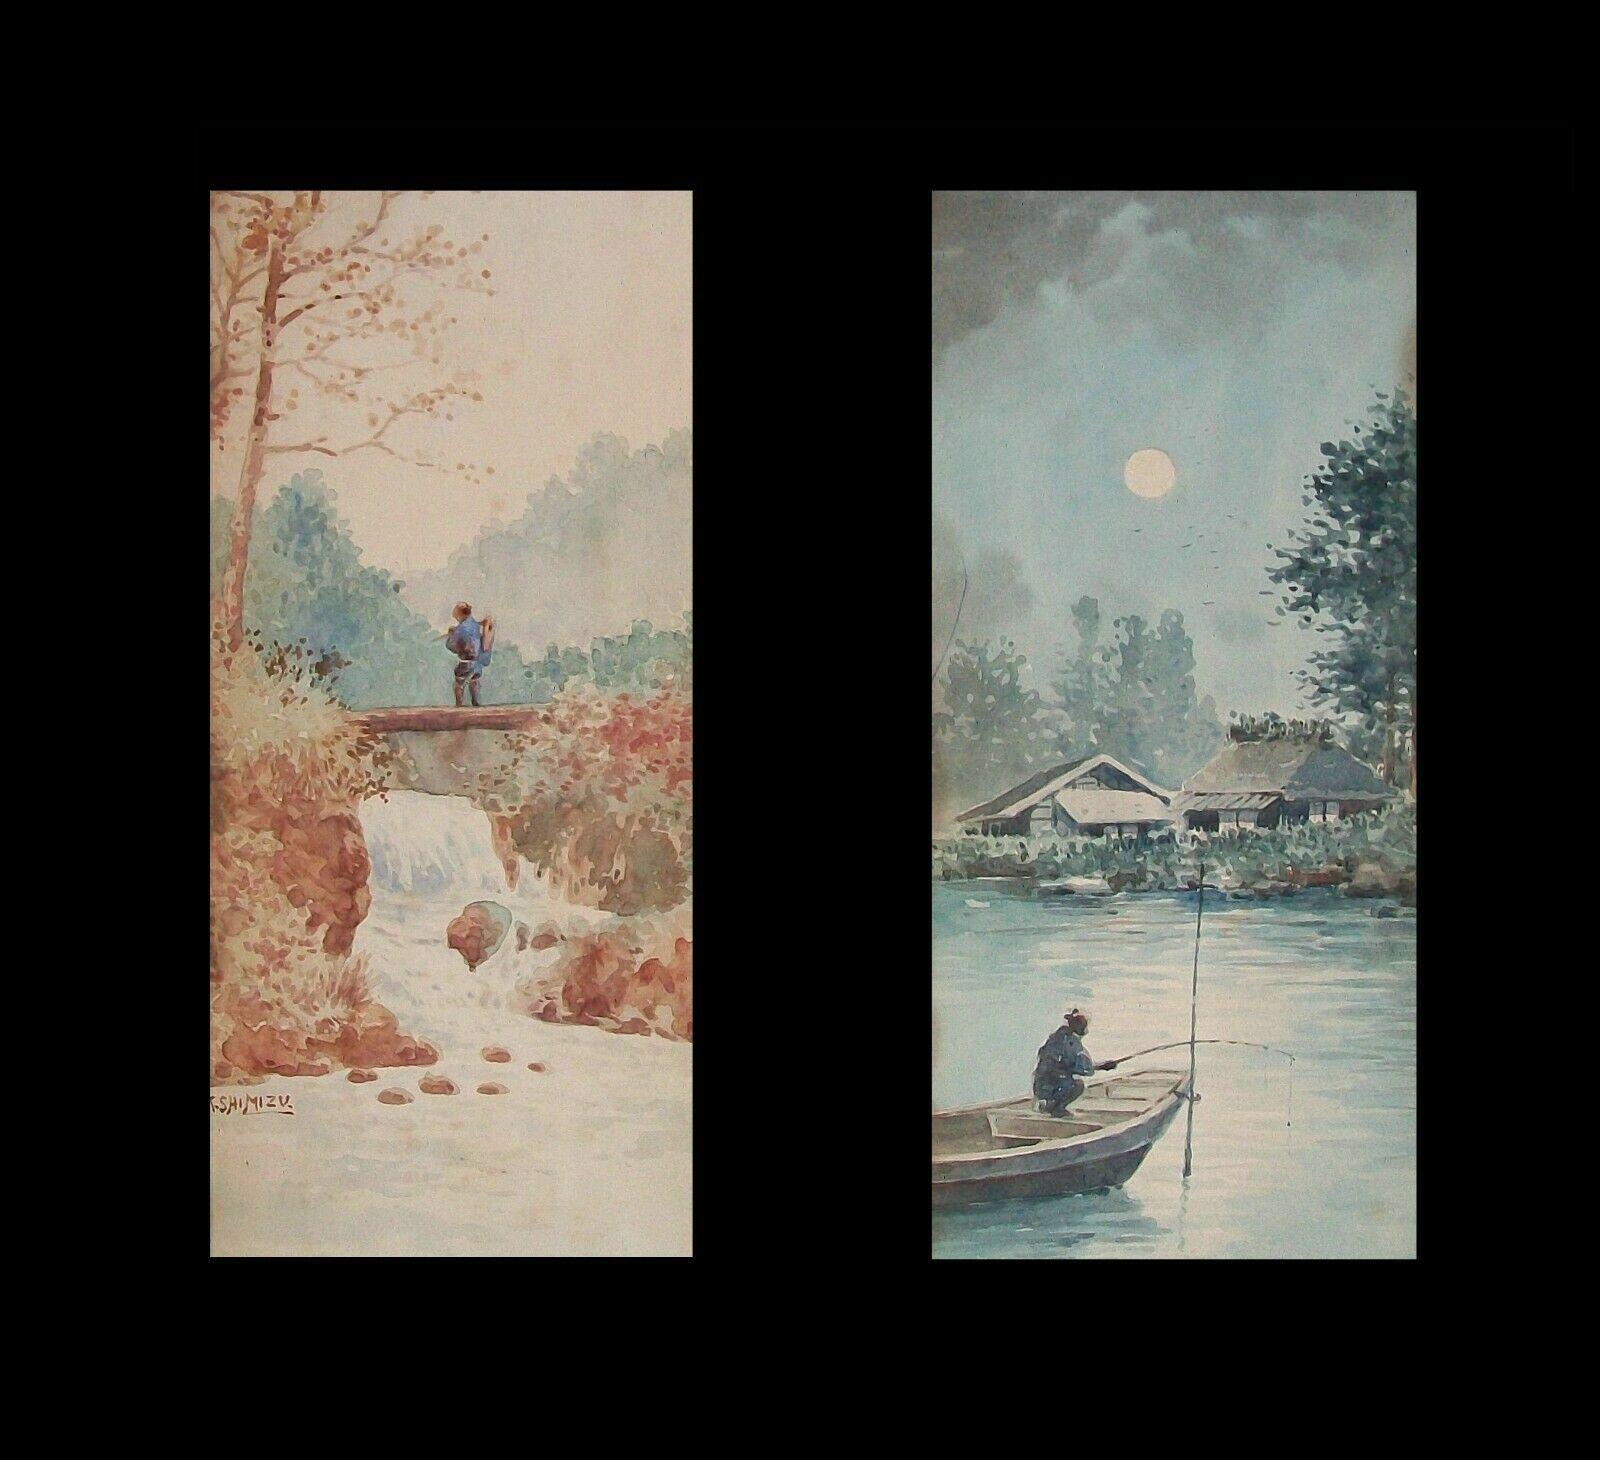 KIYOSHI SHIMIZU (1900-1969 Japan / United States) - Untitled ('Day & Night') - Rare antique pair of Japanese themed watercolor paintings on paper - both paintings featuring a lone figure set against a water filled landscape, both male figures